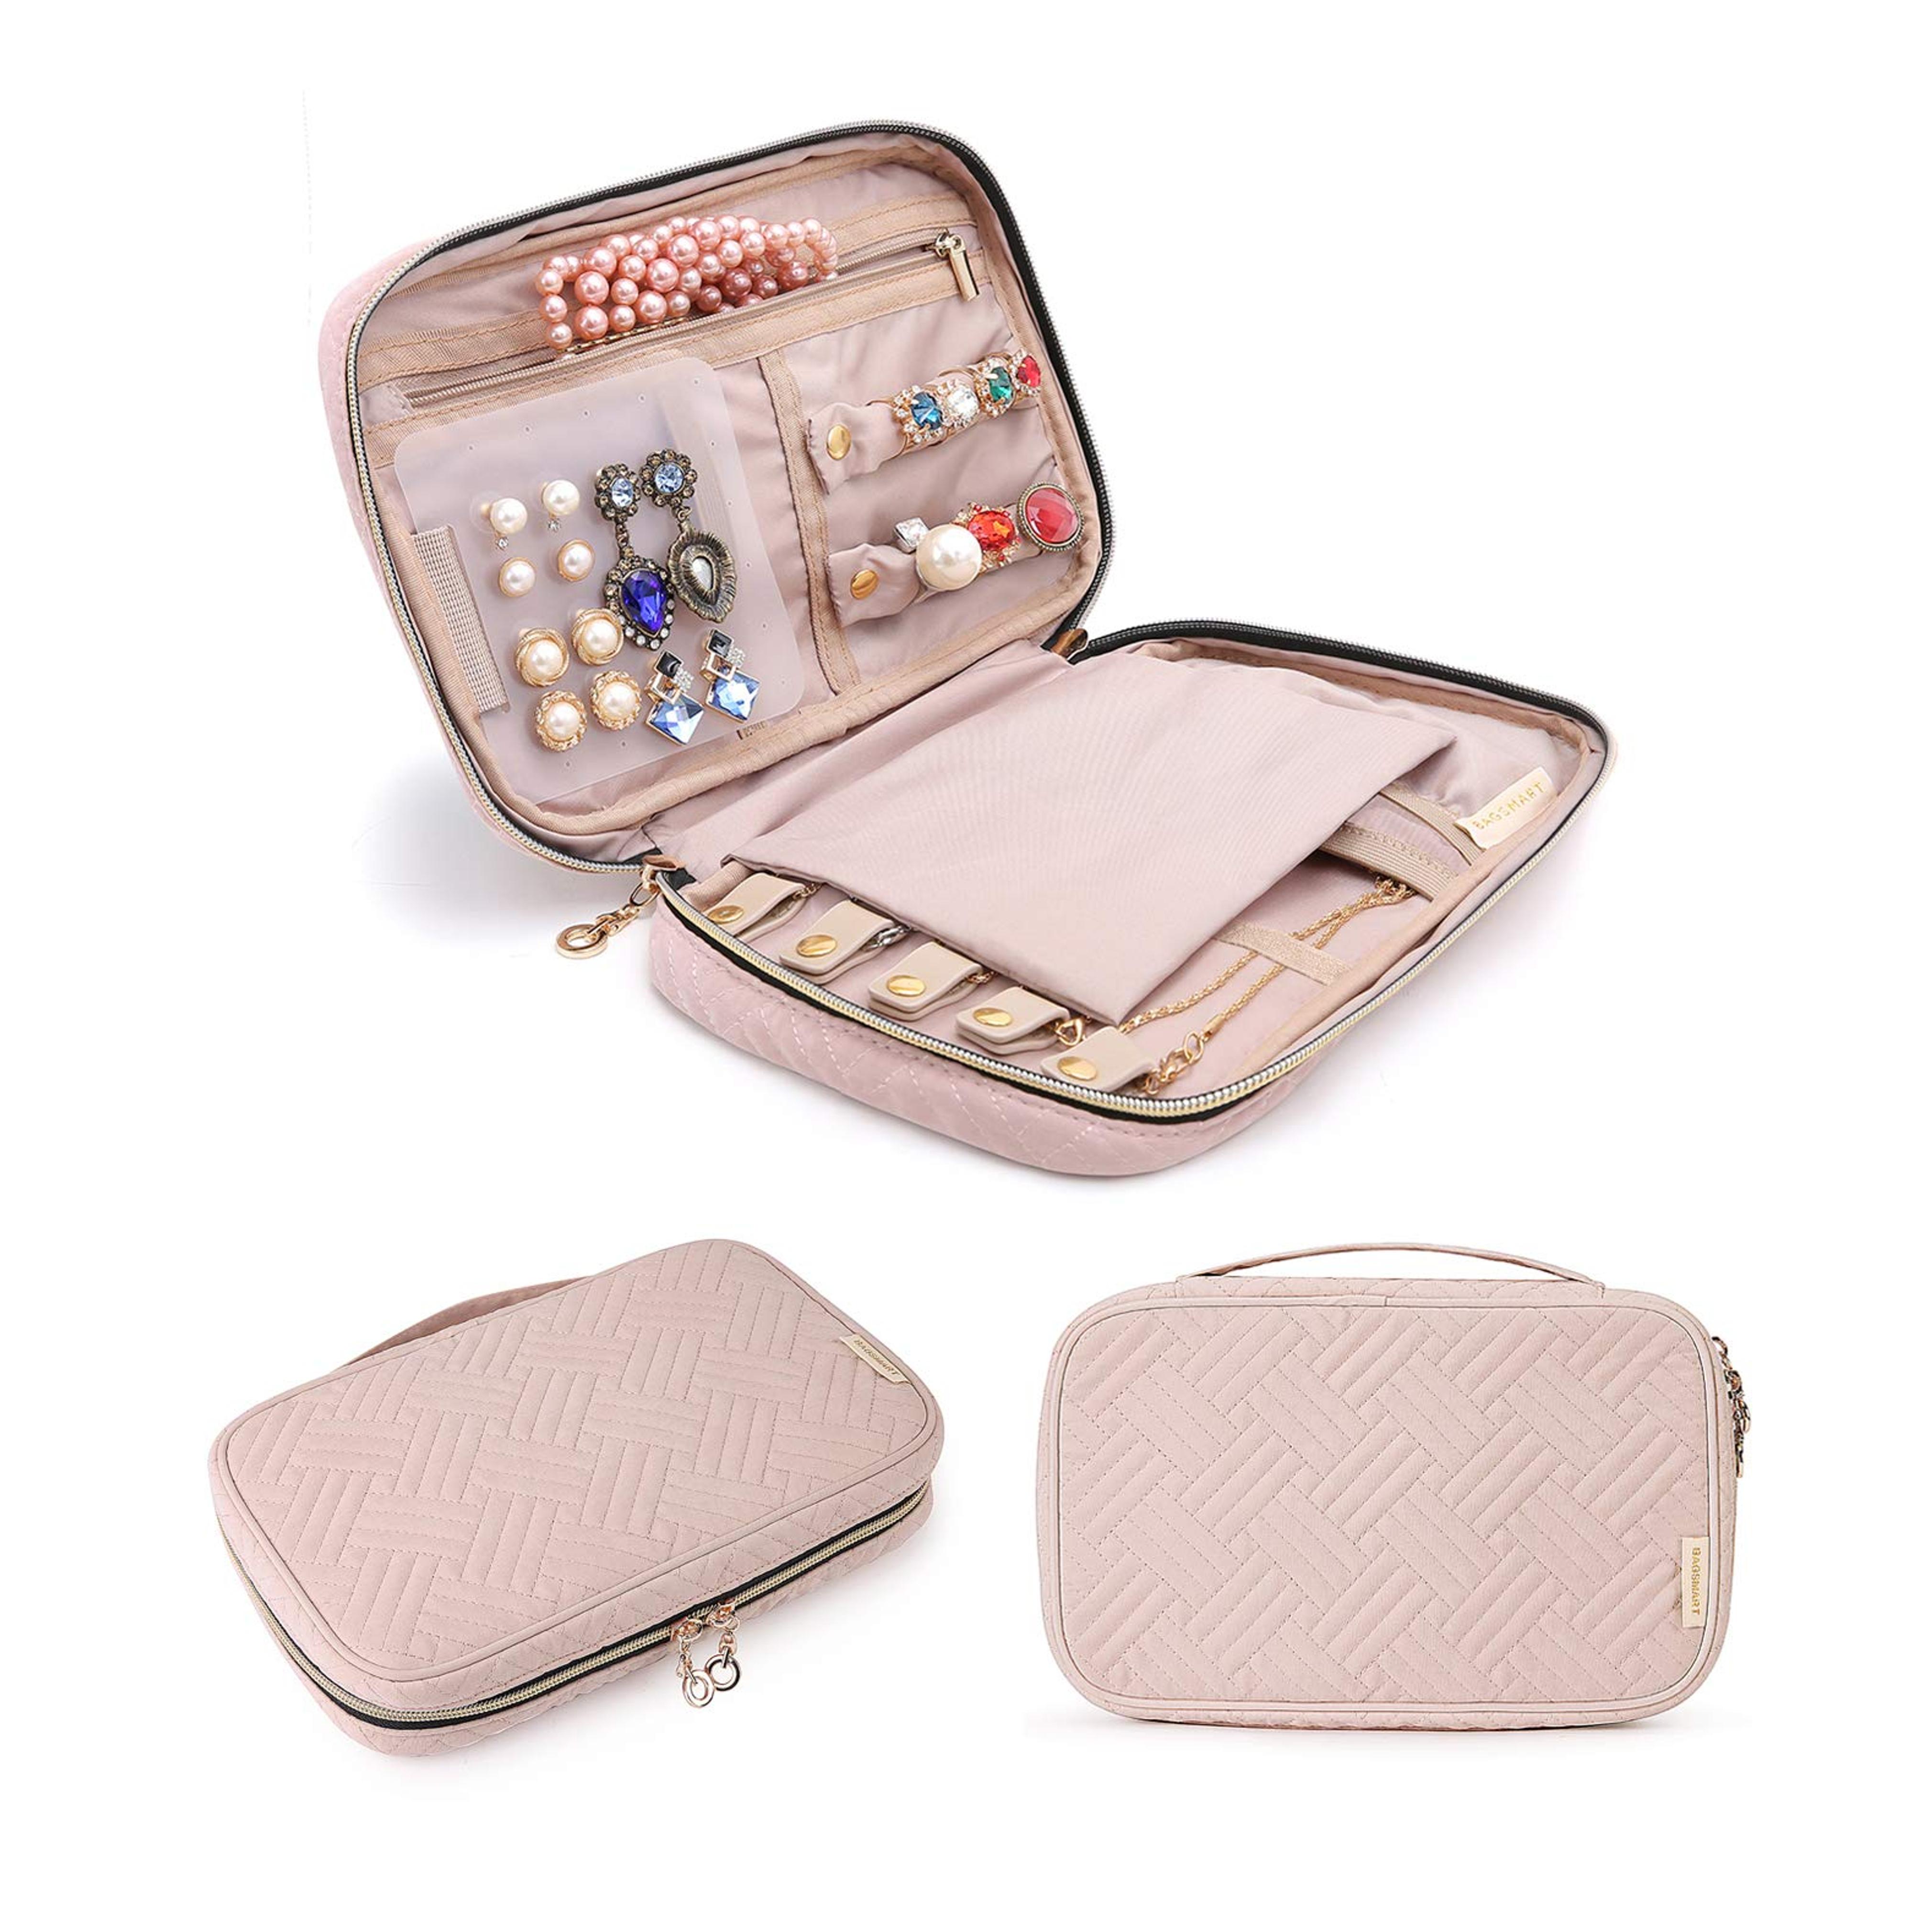 BAGSMART Jewelry Organizer Case Travel Jewelry Storage Bag for Necklace, Earrings, Rings, Bracelet, Soft Pink